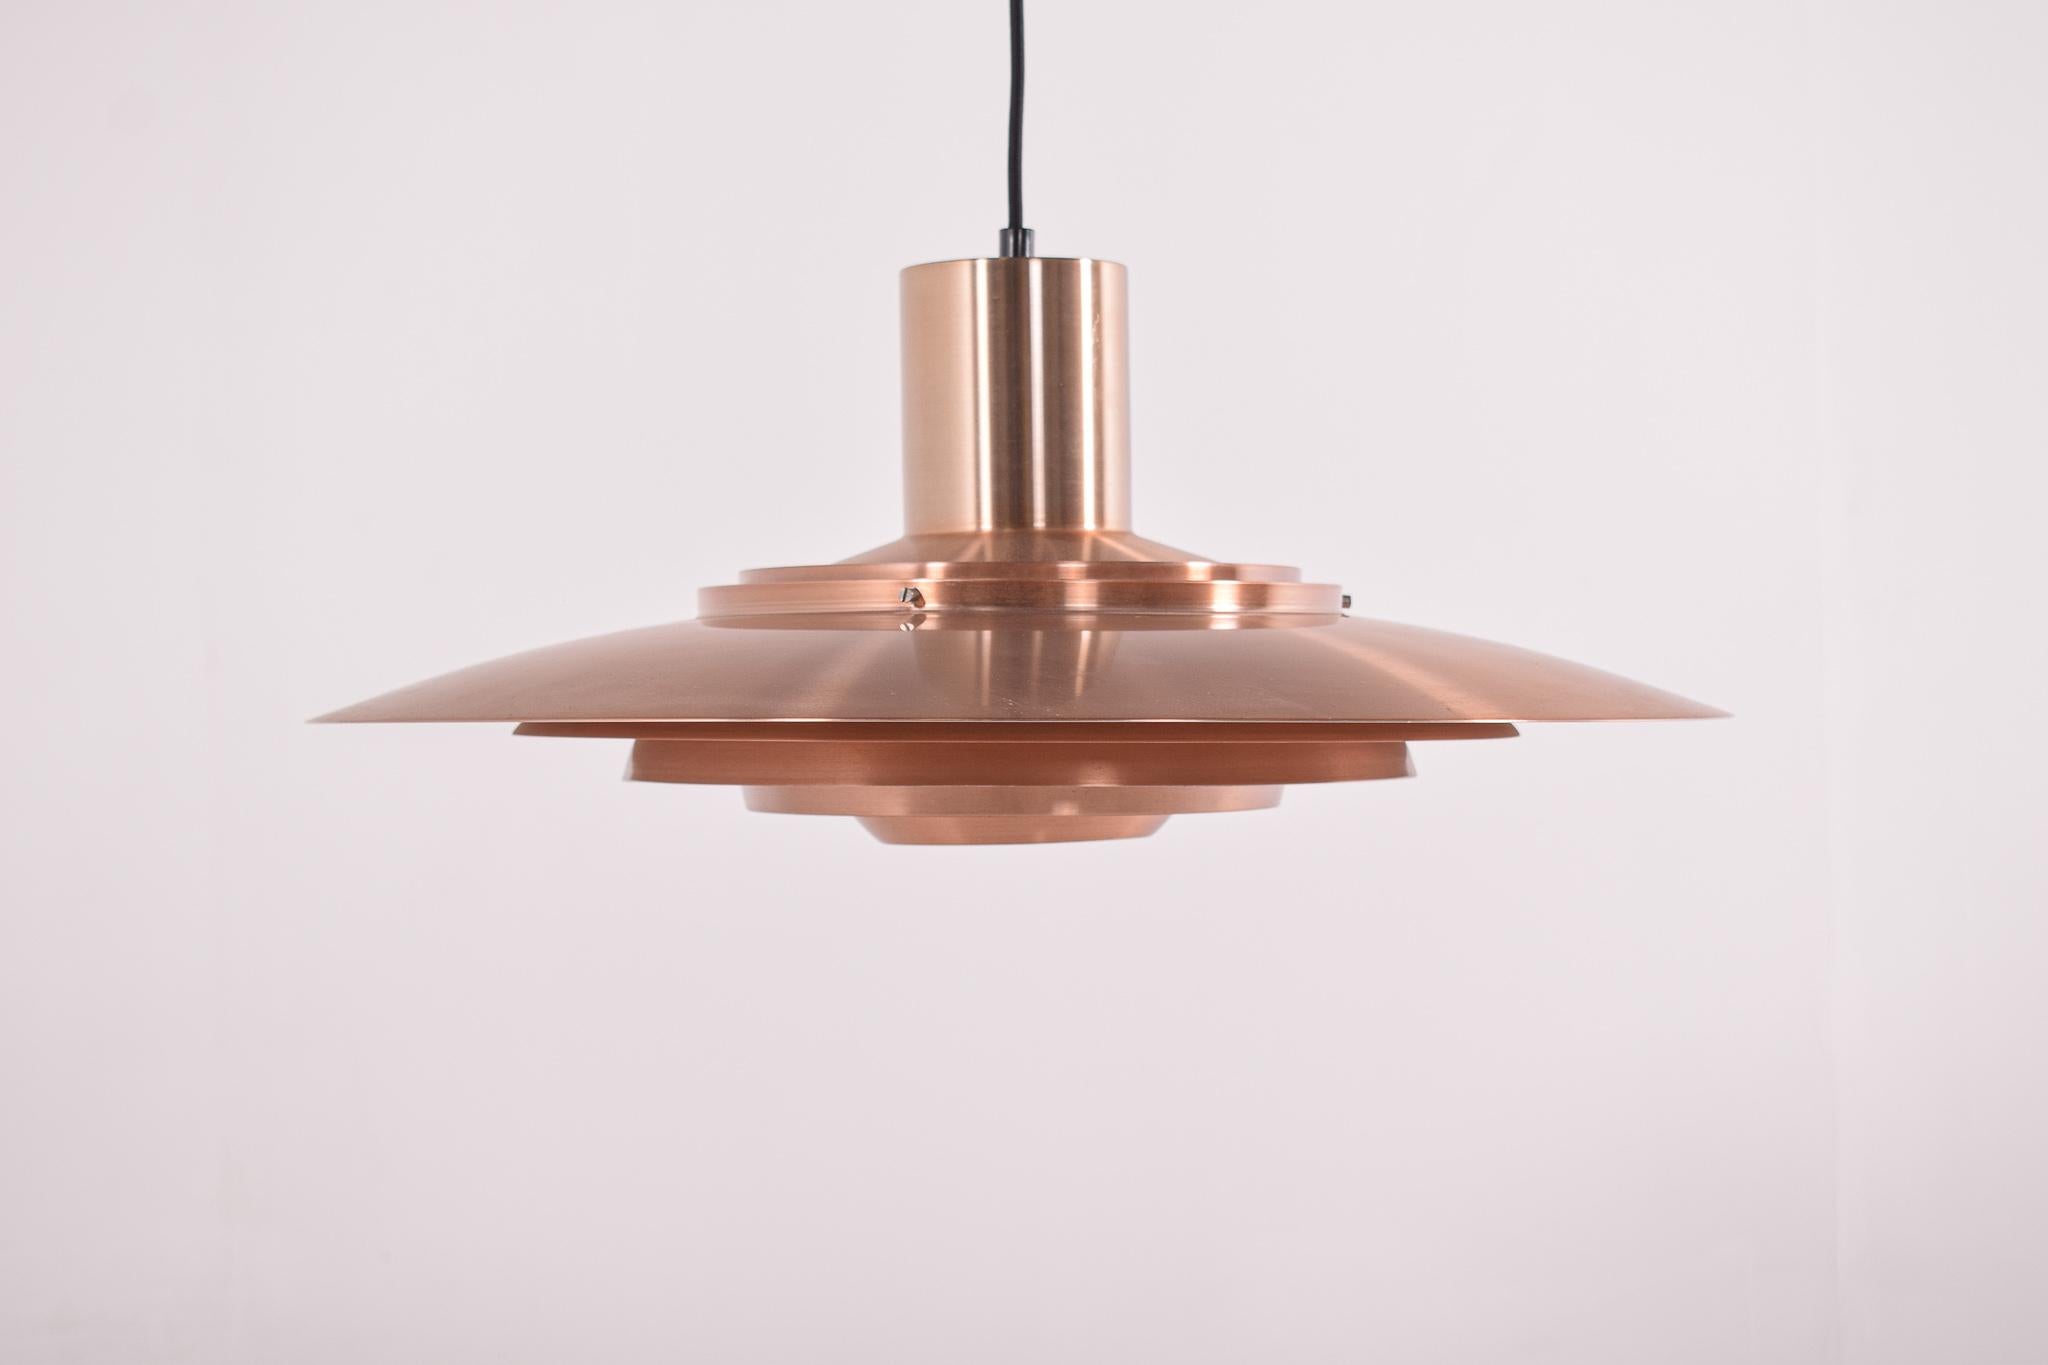 Copper ceiling lamp by Preben Fabricius & Jørgen Kastholm for Nordisk Solar, 1950s. Majestic floating from the ceiling does this elegant and rare P700 copper ceiling light. Designed for the large dining table or conference table, made from the best